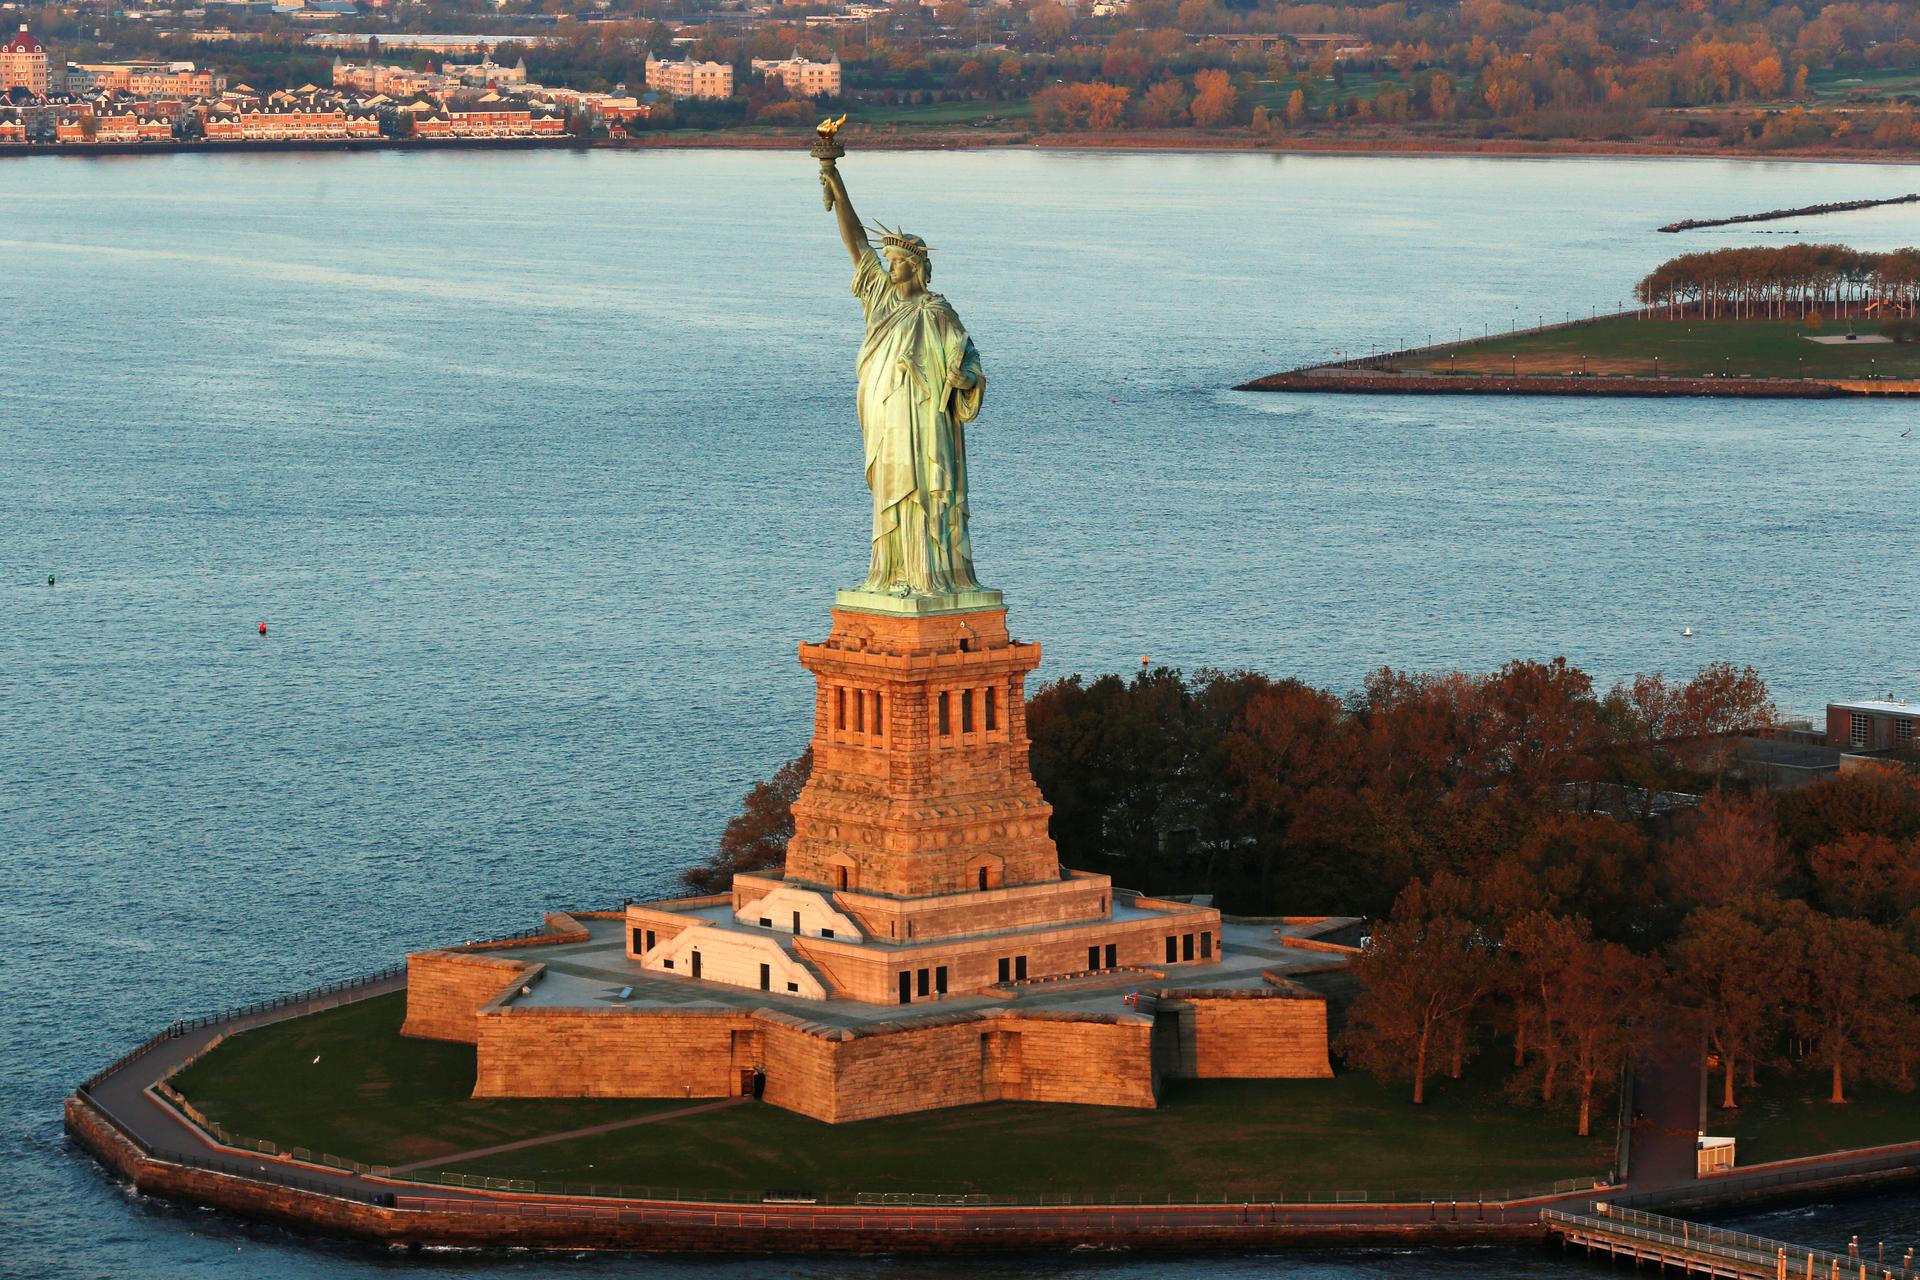 The sun lights the Statue of Liberty in New York, November 2016